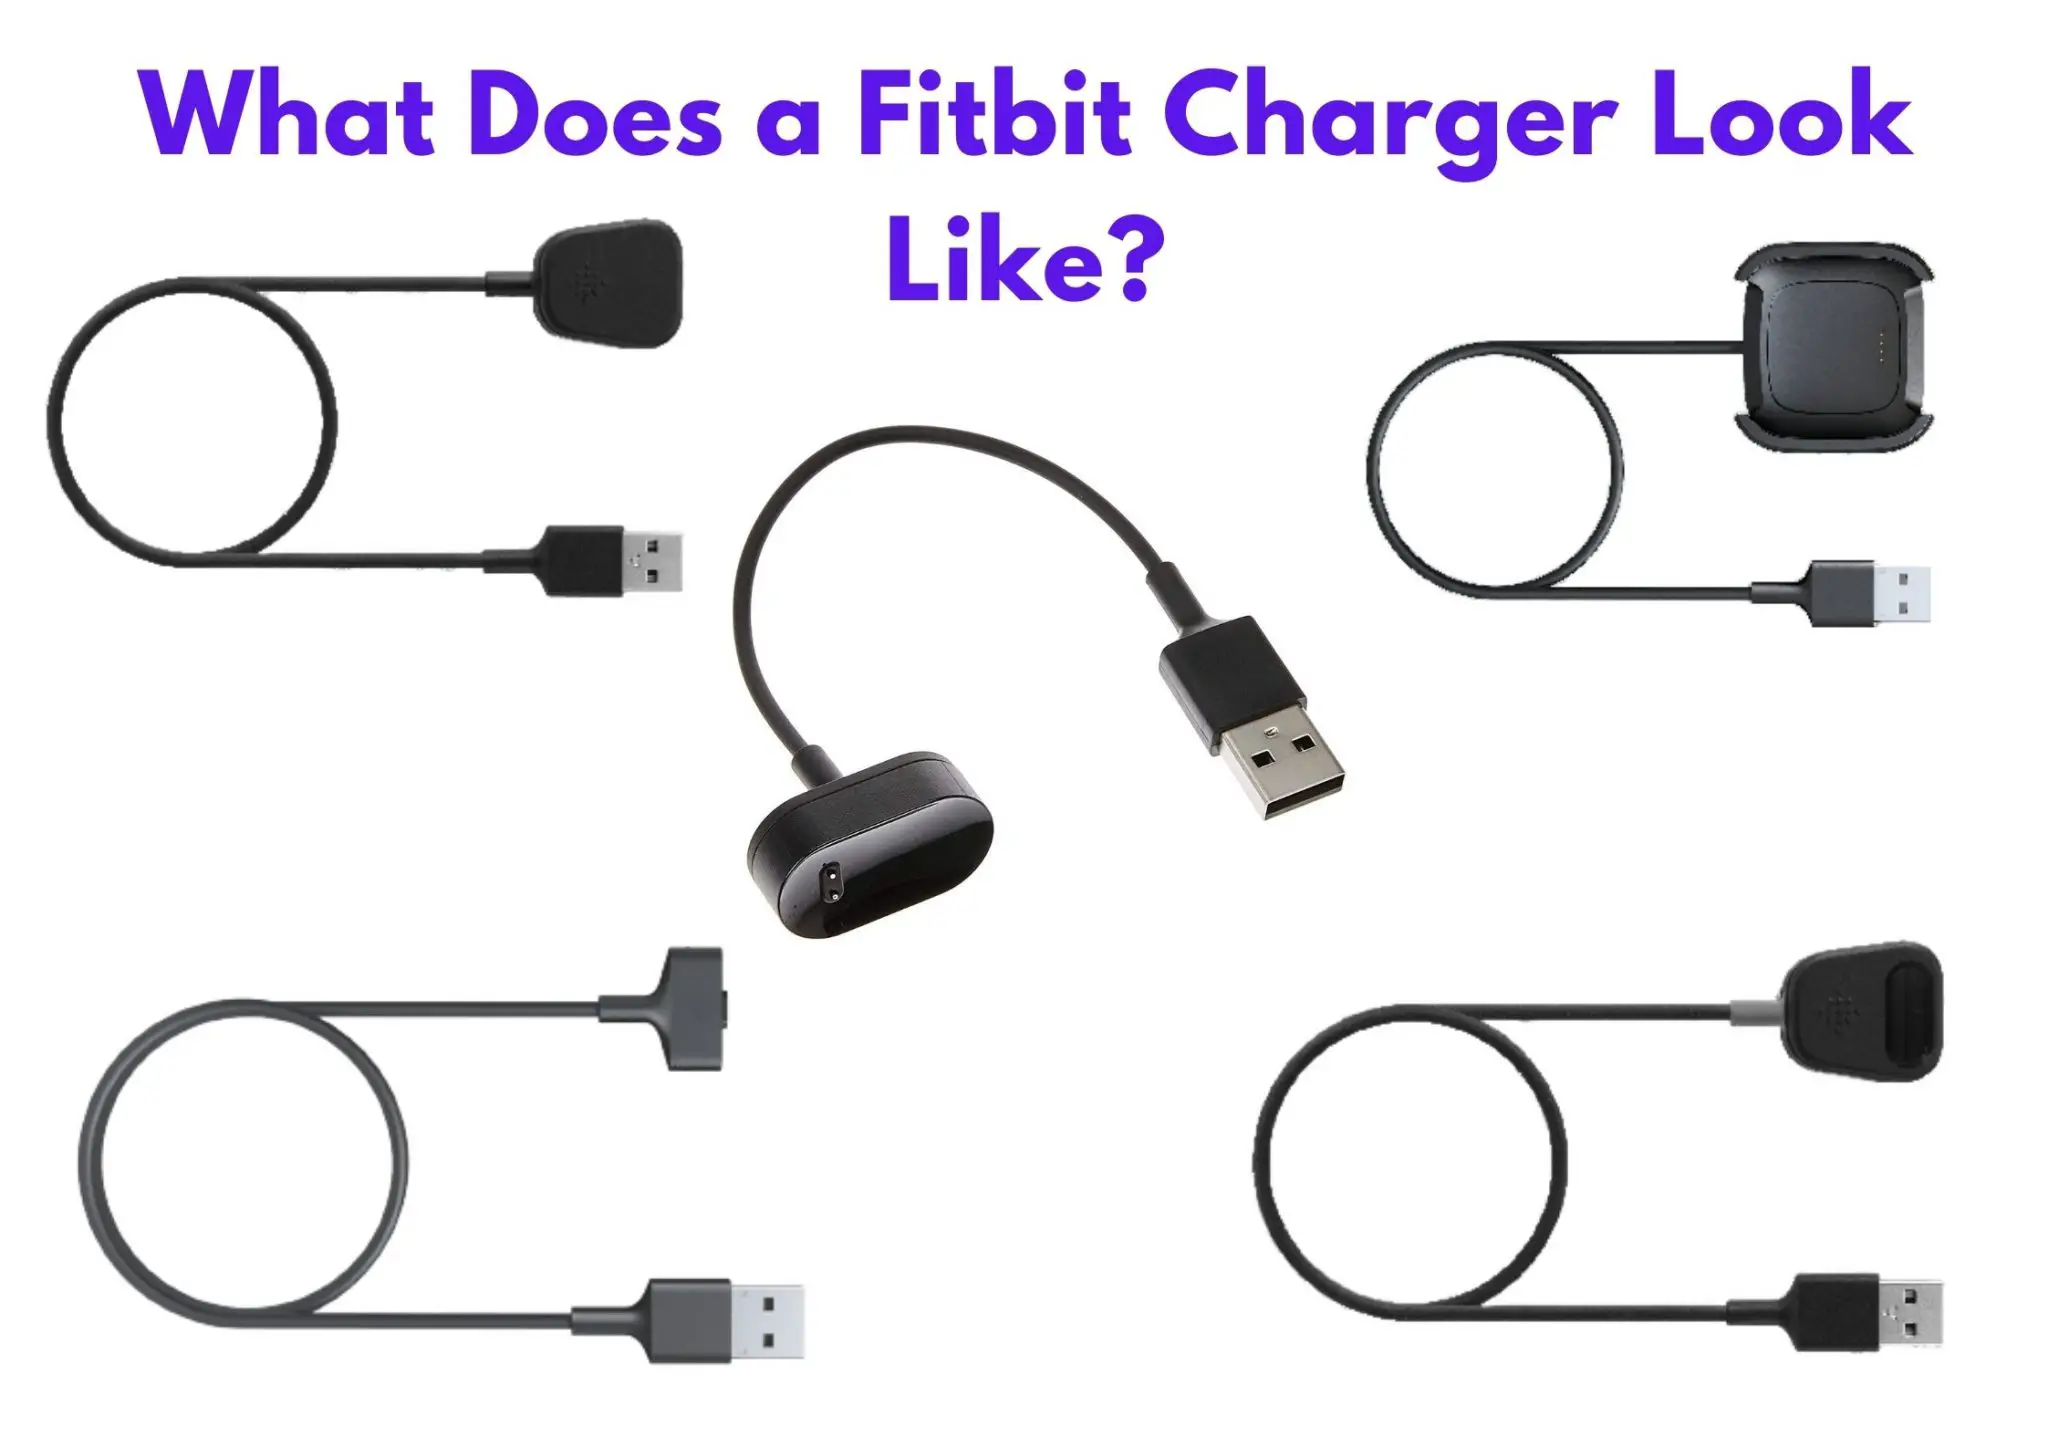 What Does The Fitbit Charger Look Like?